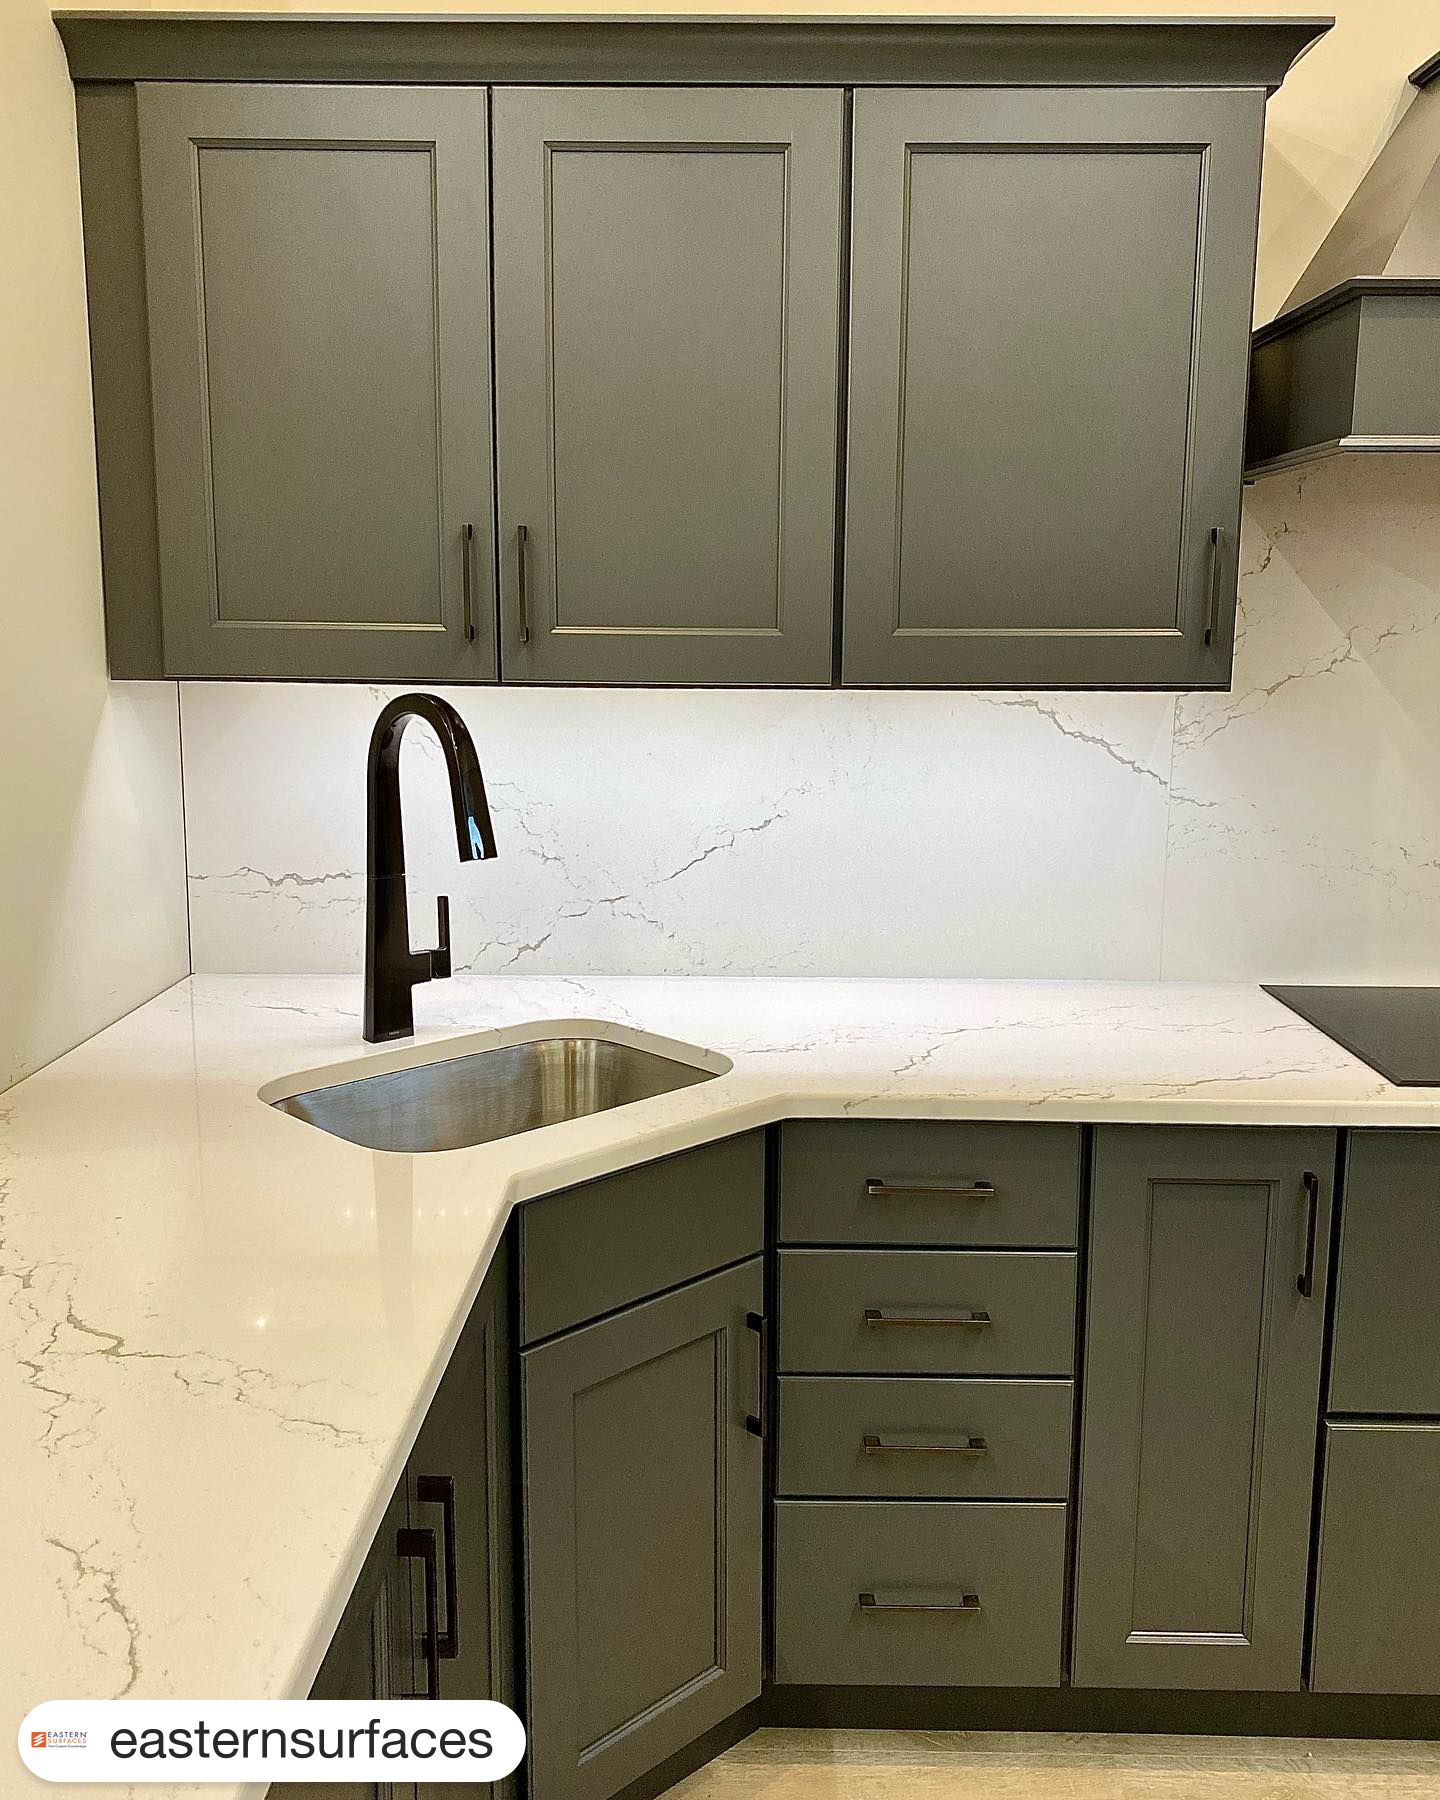 Cambria Surfaces Inverness Frost flowing through a full height backsplash in this Eastern Surfaces fabricated and installed display top!